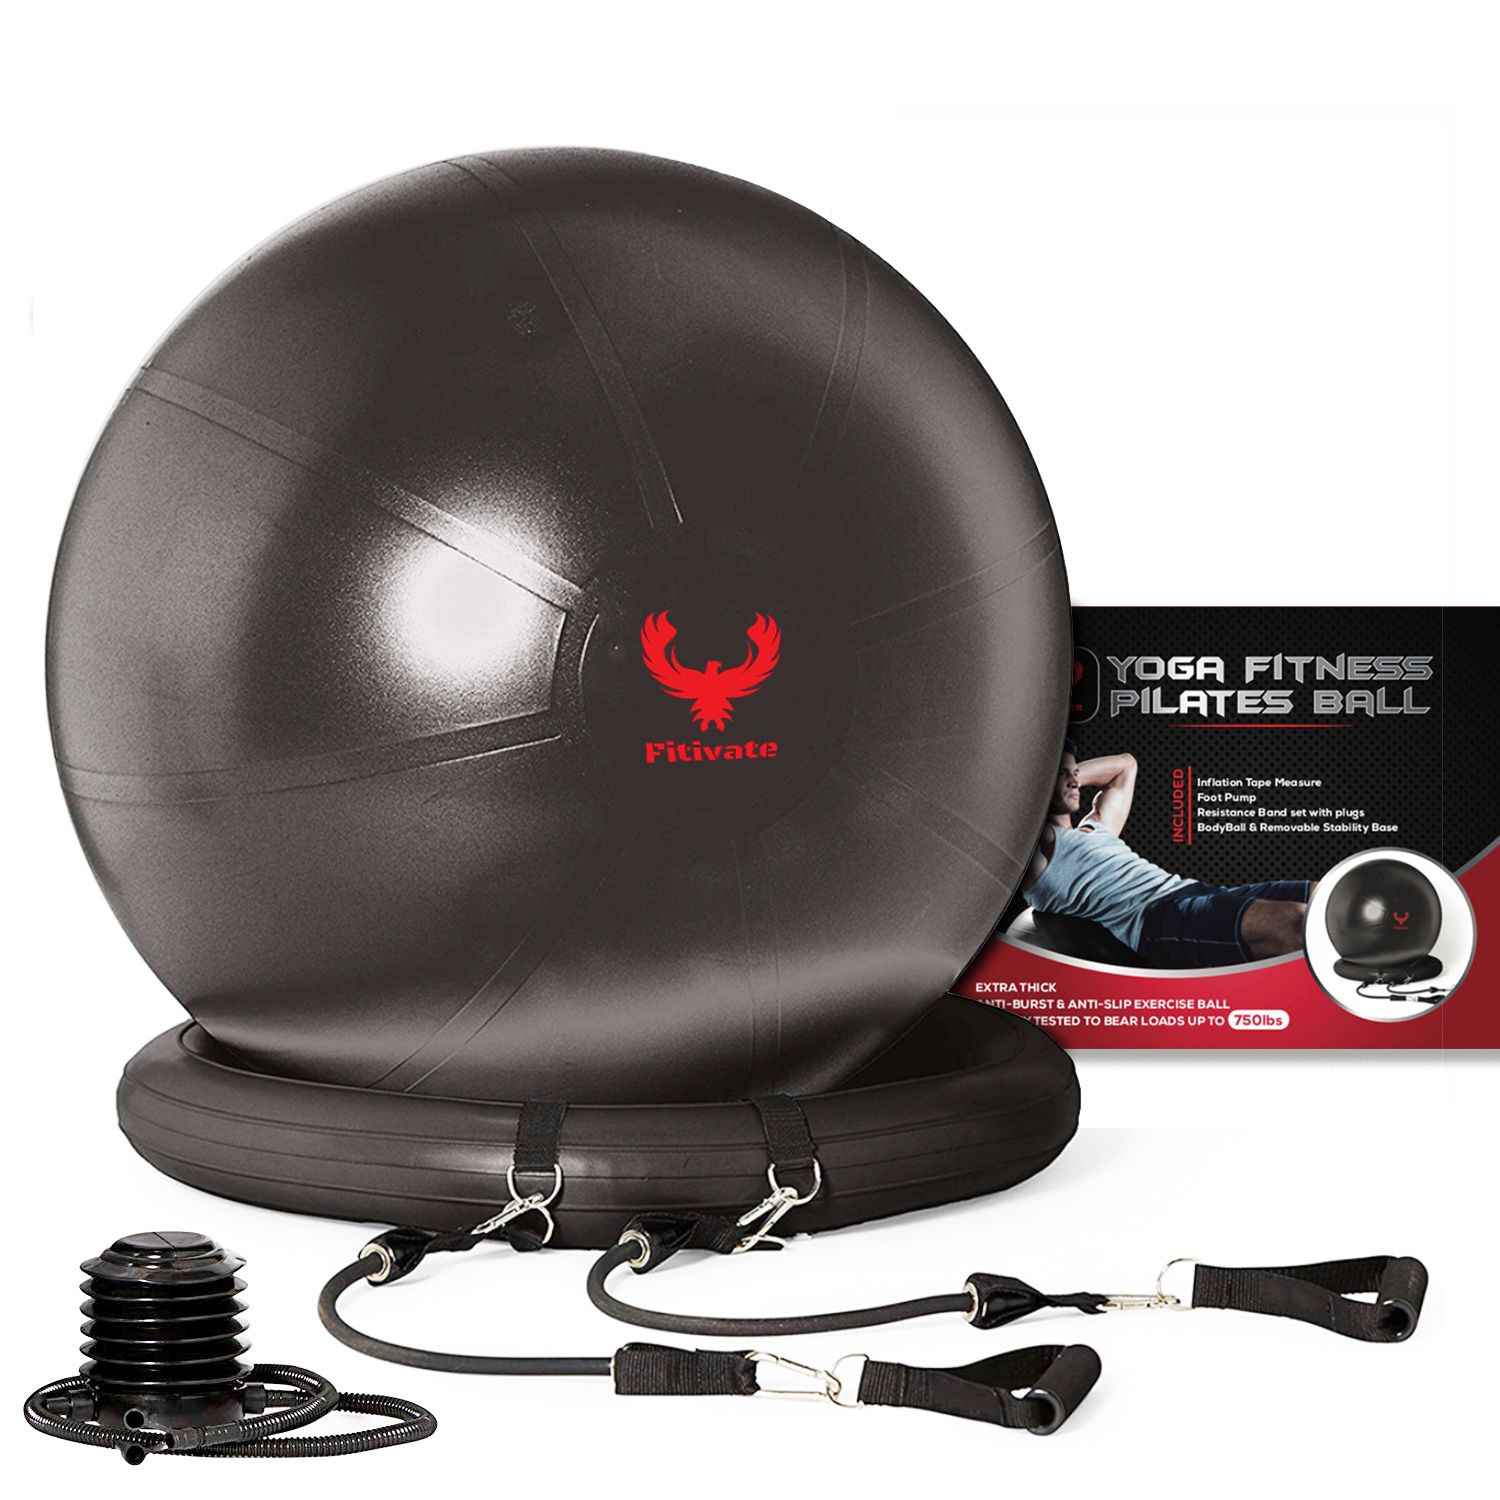 Yoga ball with resistance bands